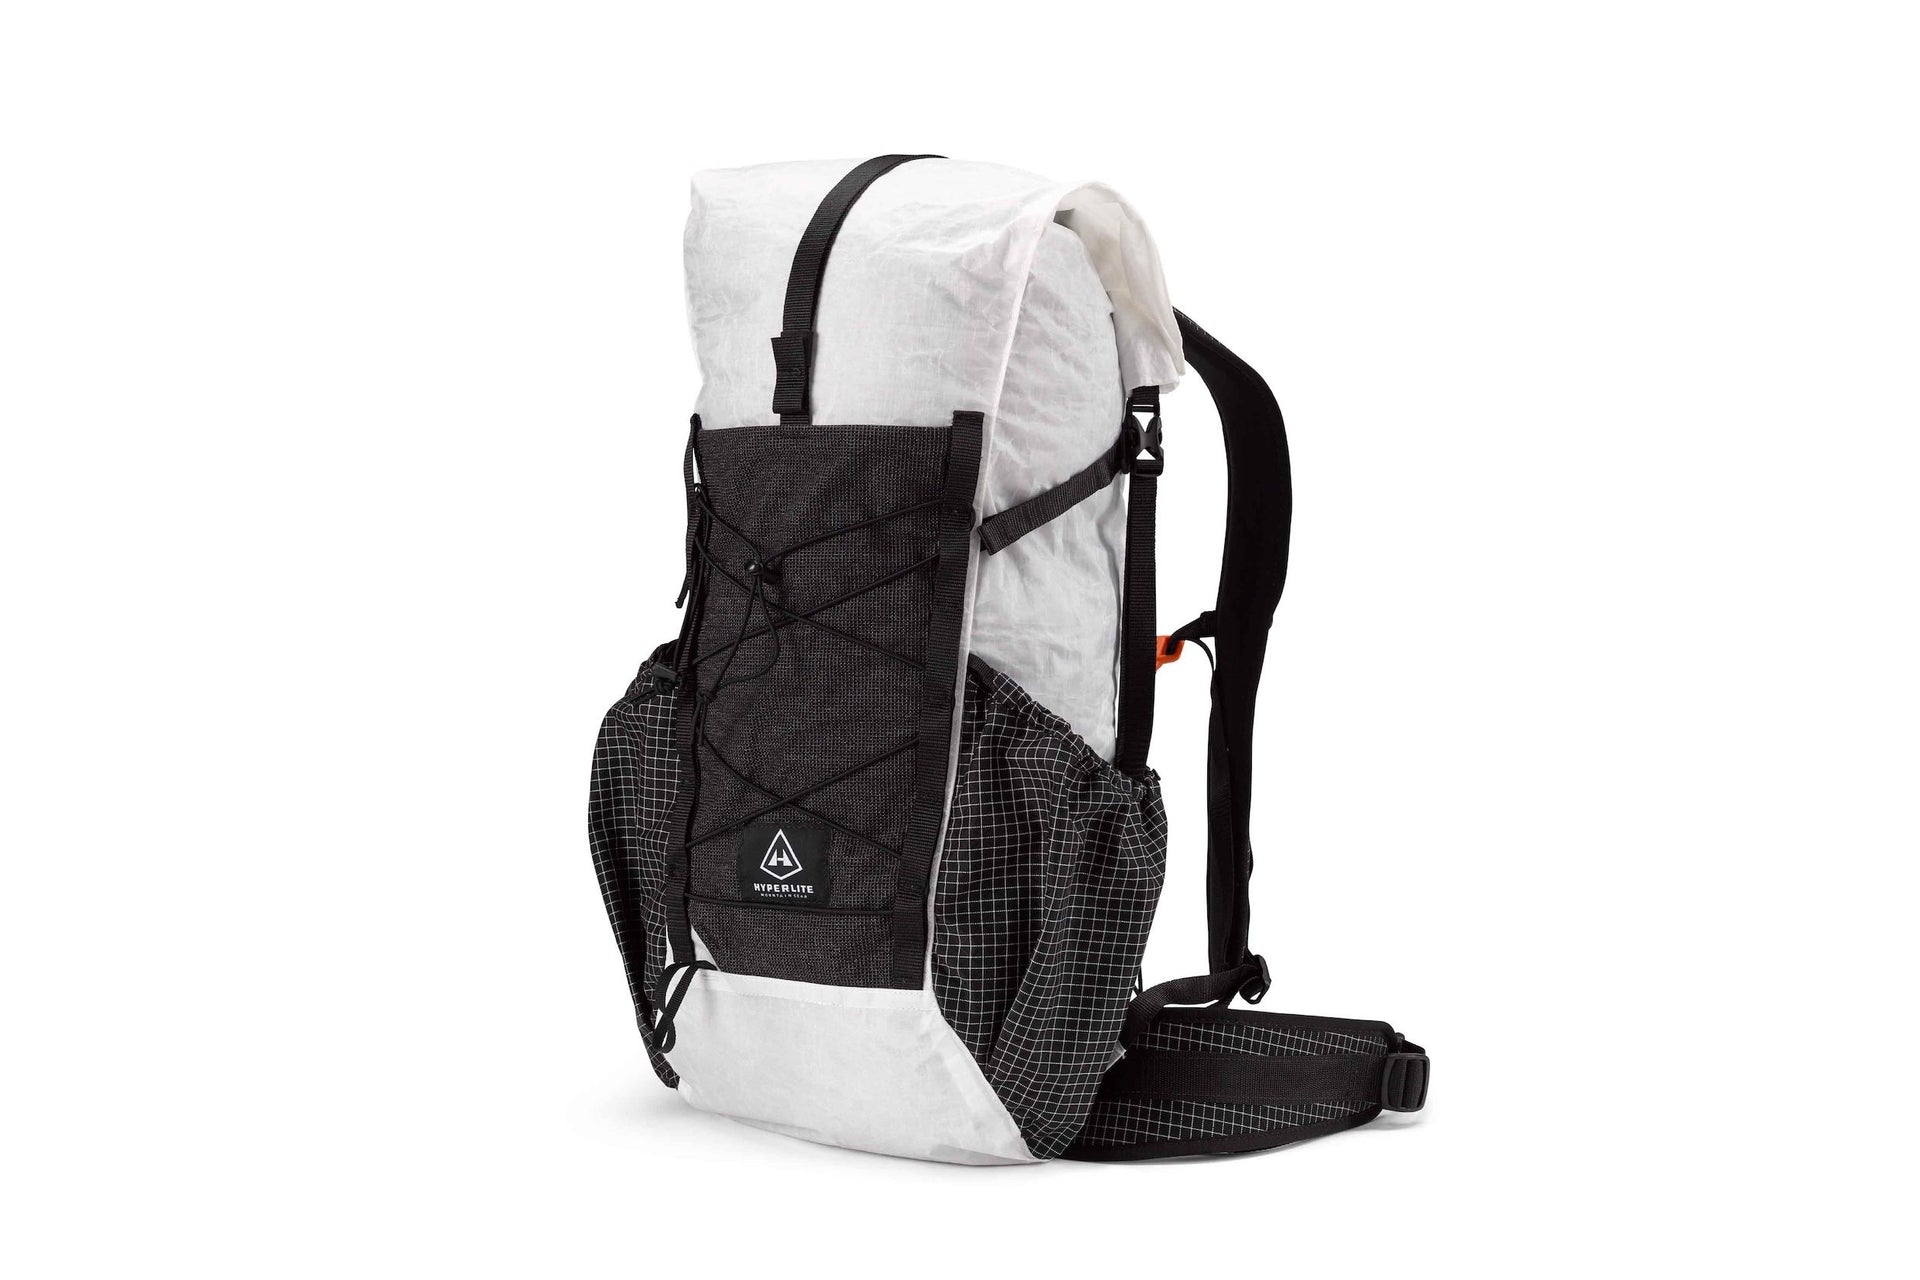 A white and black backpack on a white background.